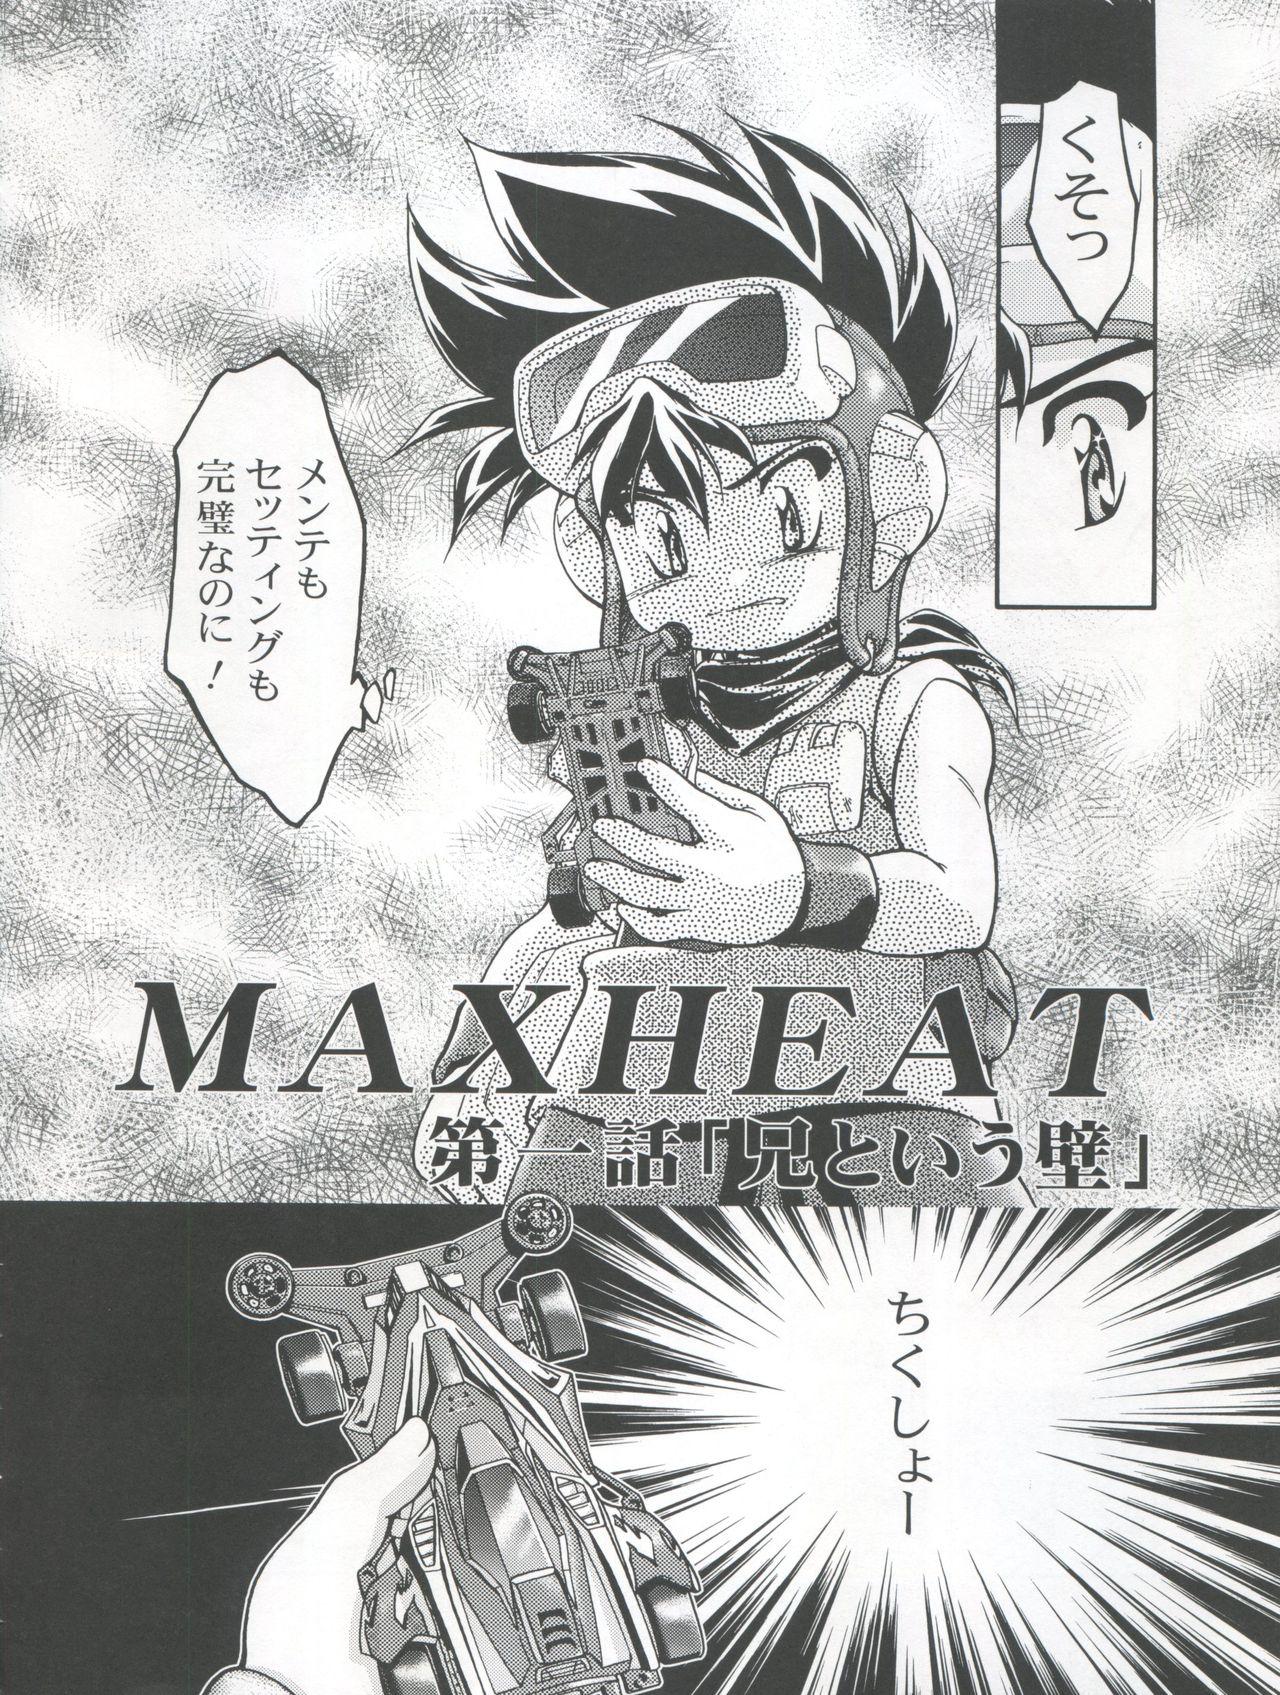 Rough Let's Ra Mix 3 MAX HEAT - Bakusou kyoudai lets and go Girlsfucking - Page 6